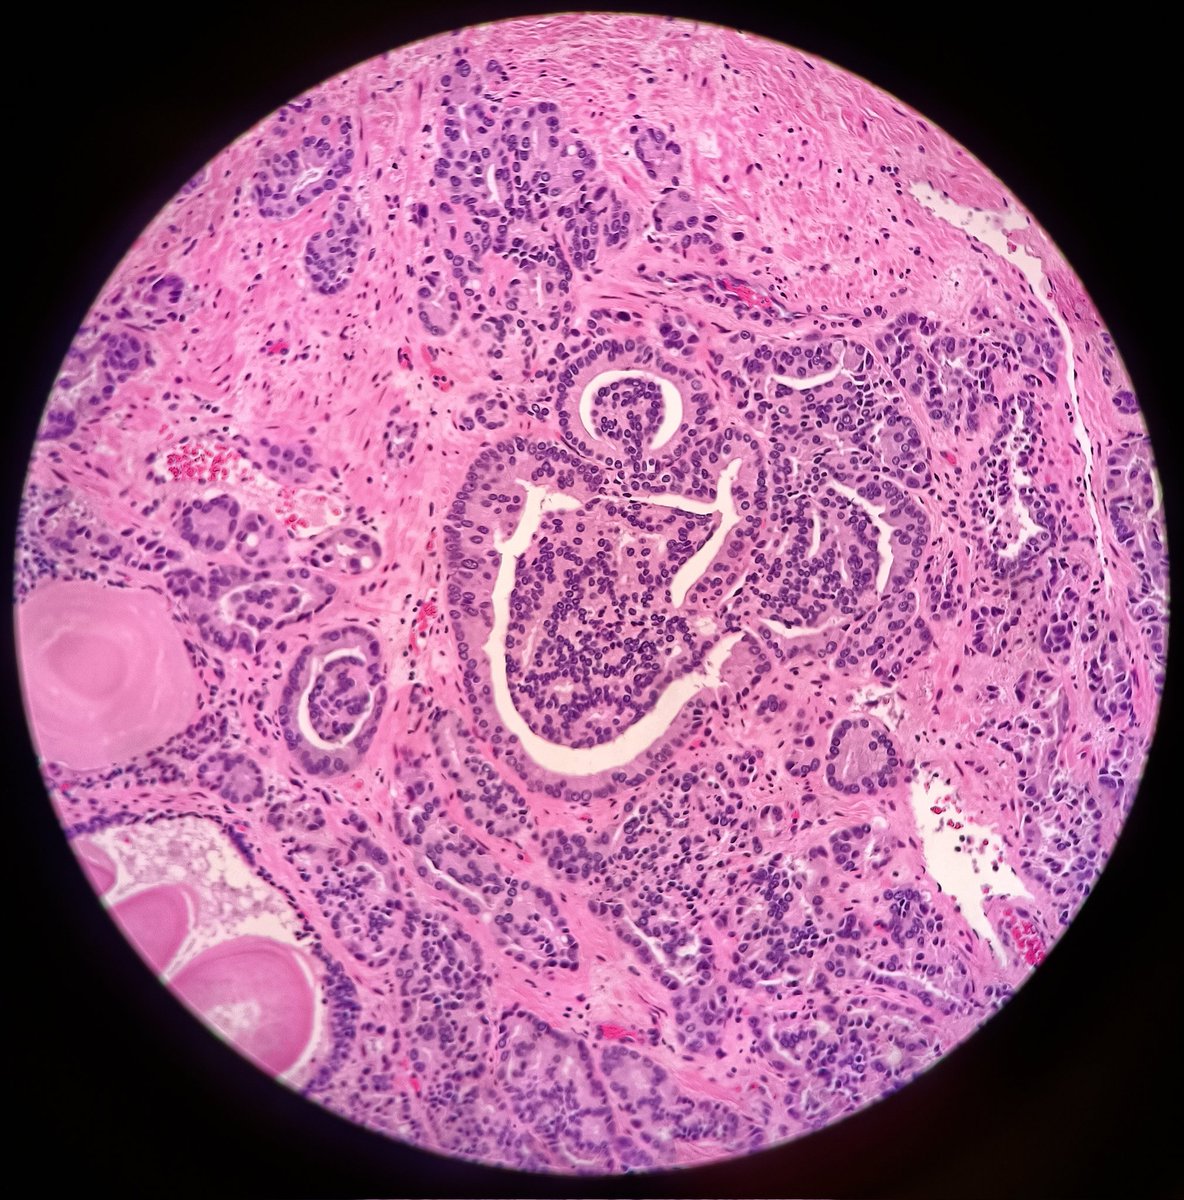 It's not a kidney and it's not a glomerulous! Where is this cute glomeruloid pattern from? #GUpath